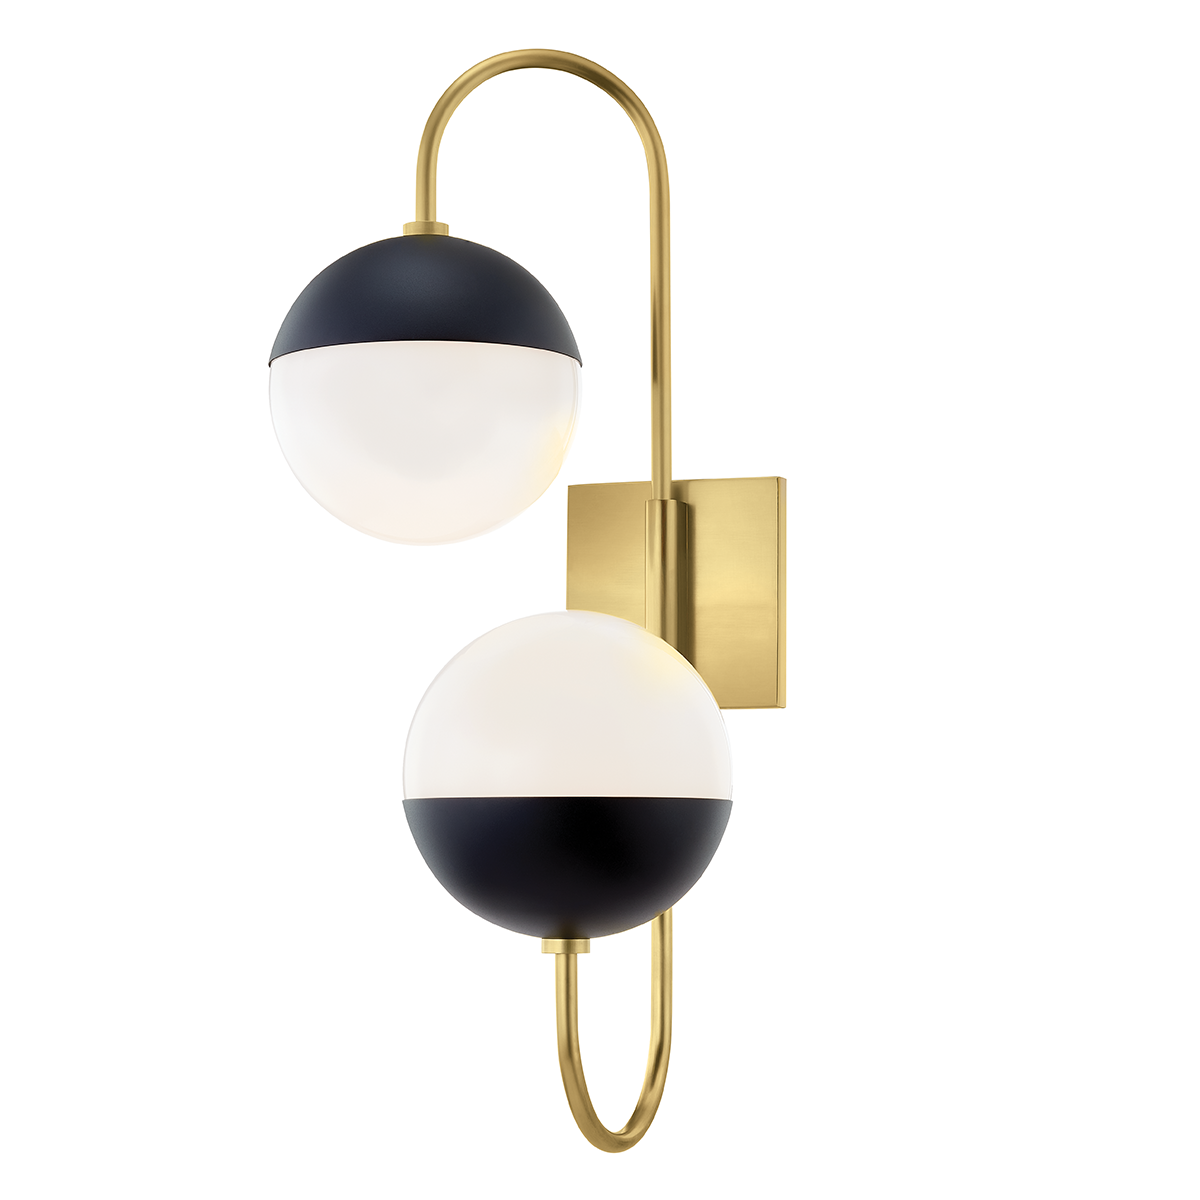 Renee 2 Light Wall Sconce-Mitzi-HVL-H344102B-AGB/BK-Outdoor Wall SconcesAged Brass/Black-1-France and Son